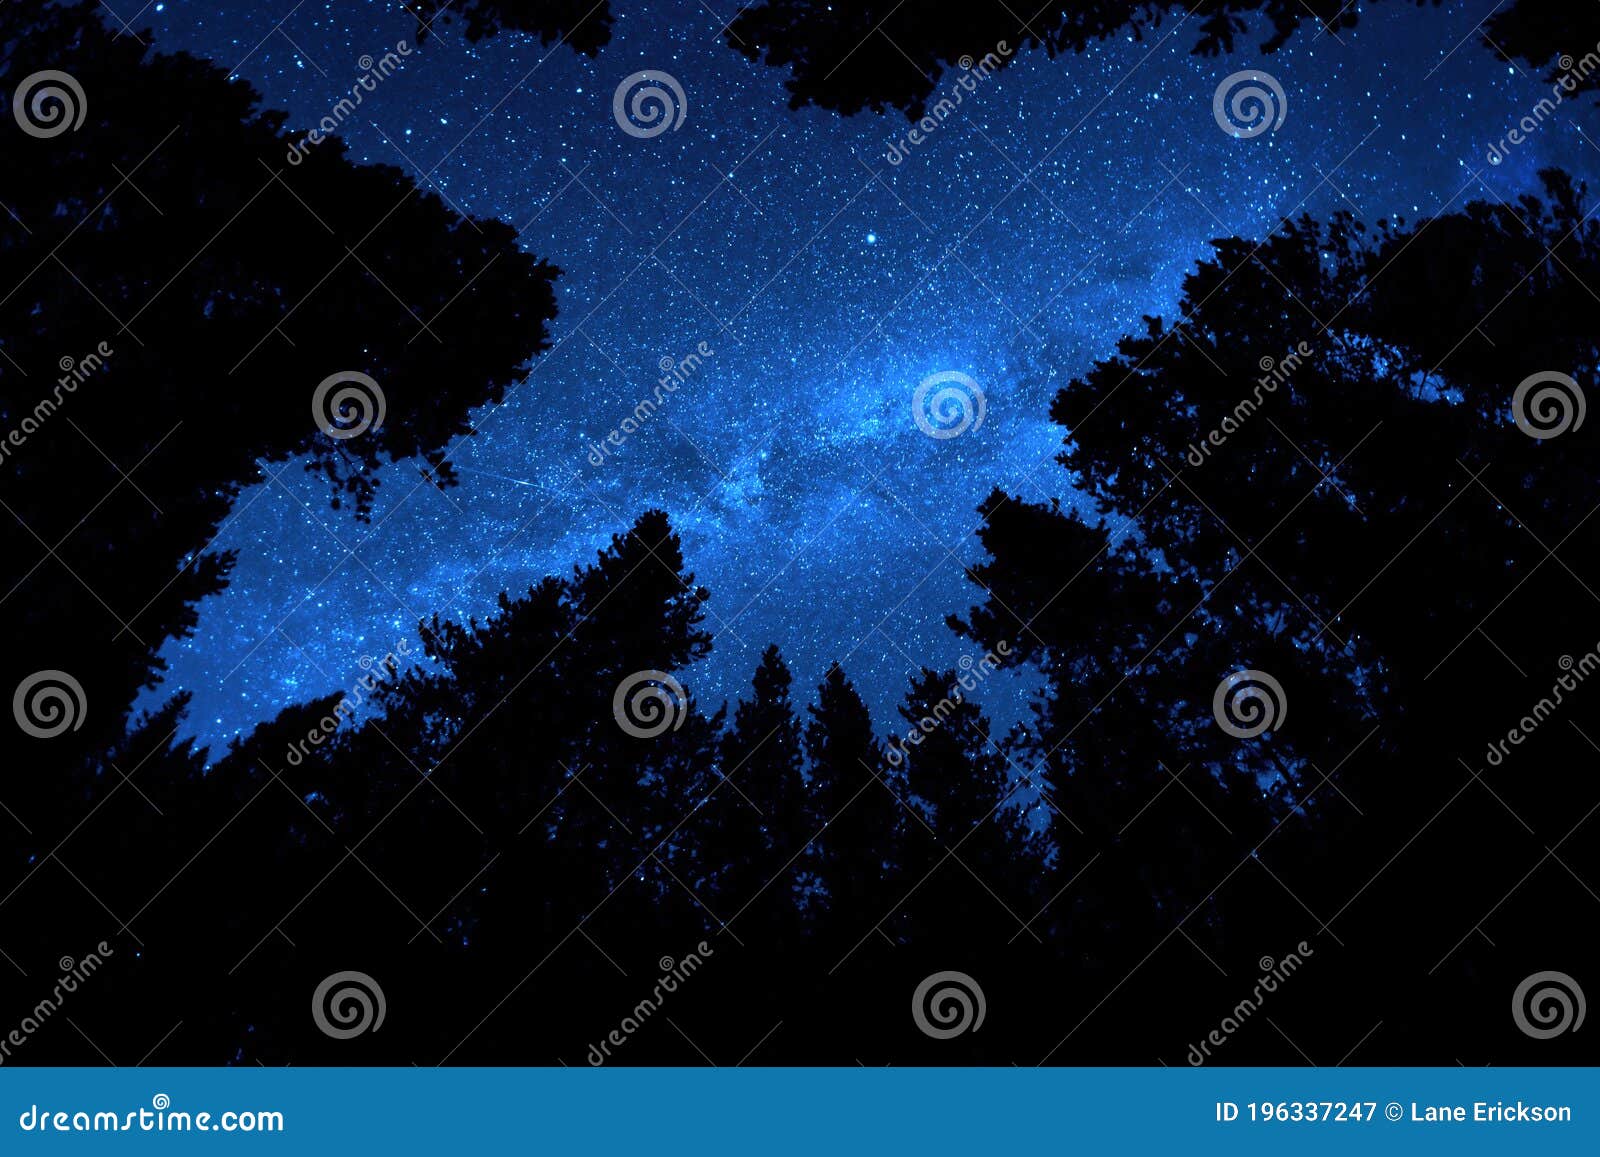 pine trees forest wilderness with milky way milkyway stars in night sky